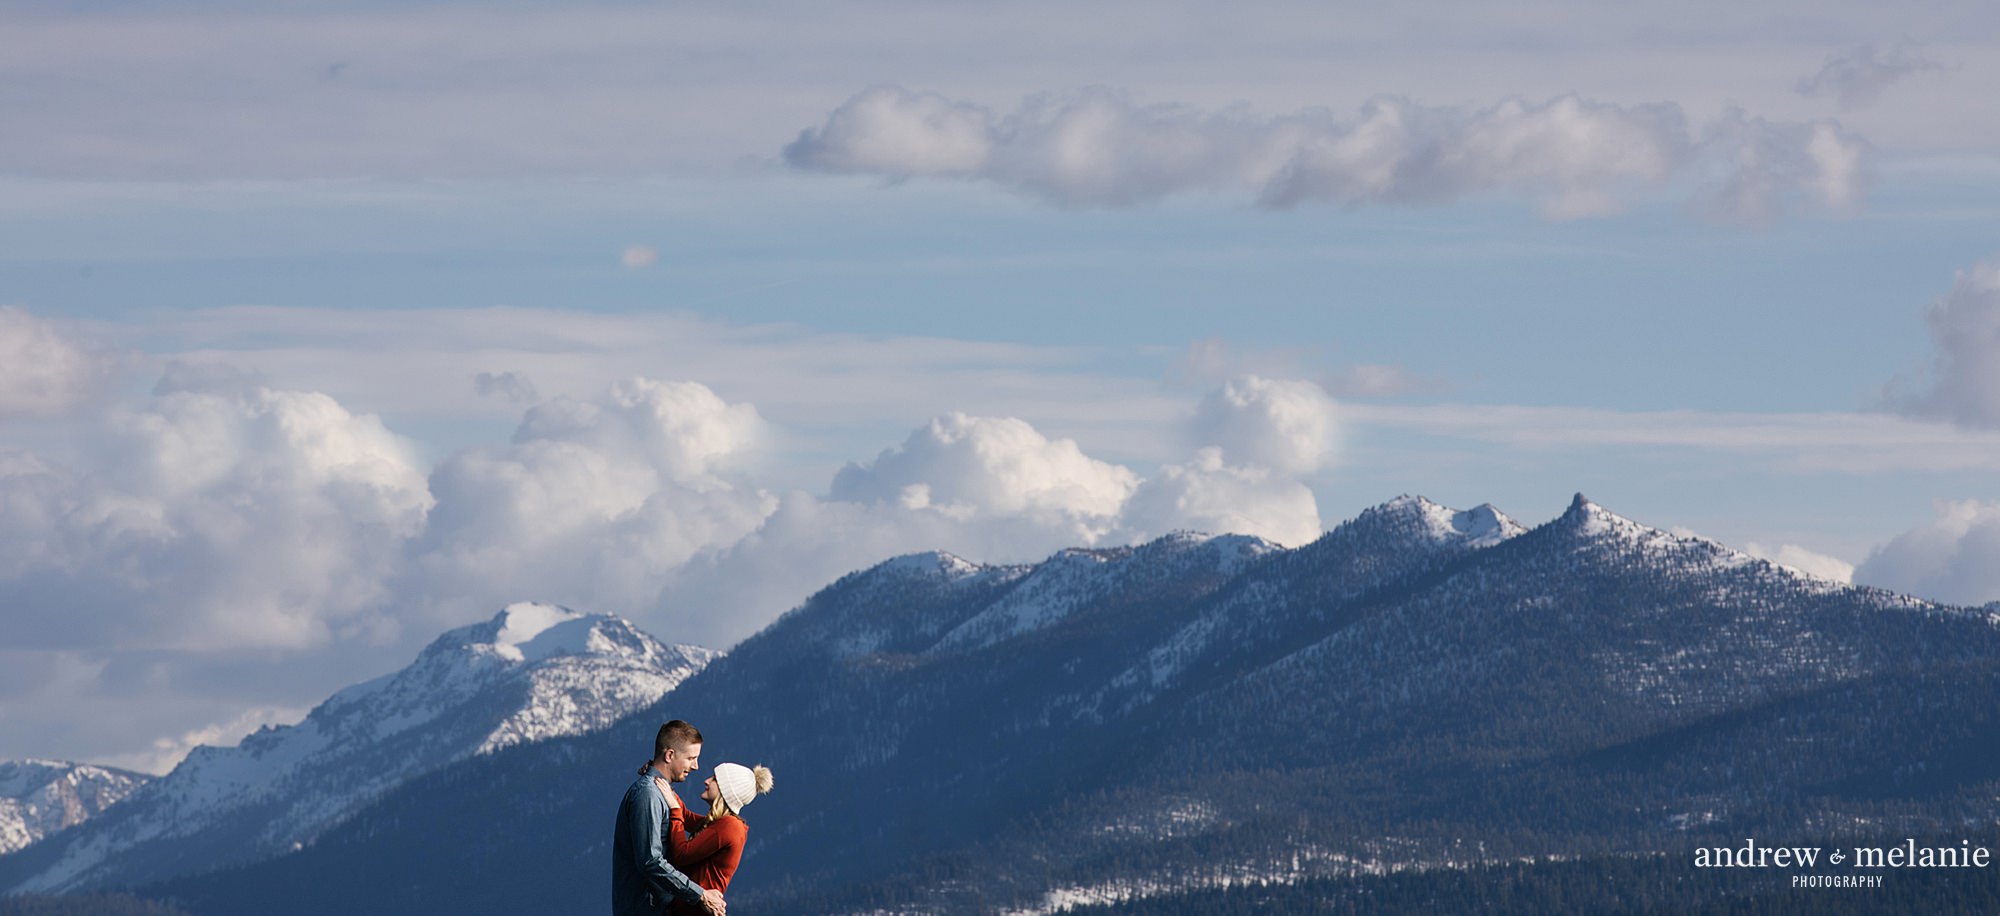 Andrew and Melanie Photography engagement session highlights Lake Tahoe, CA